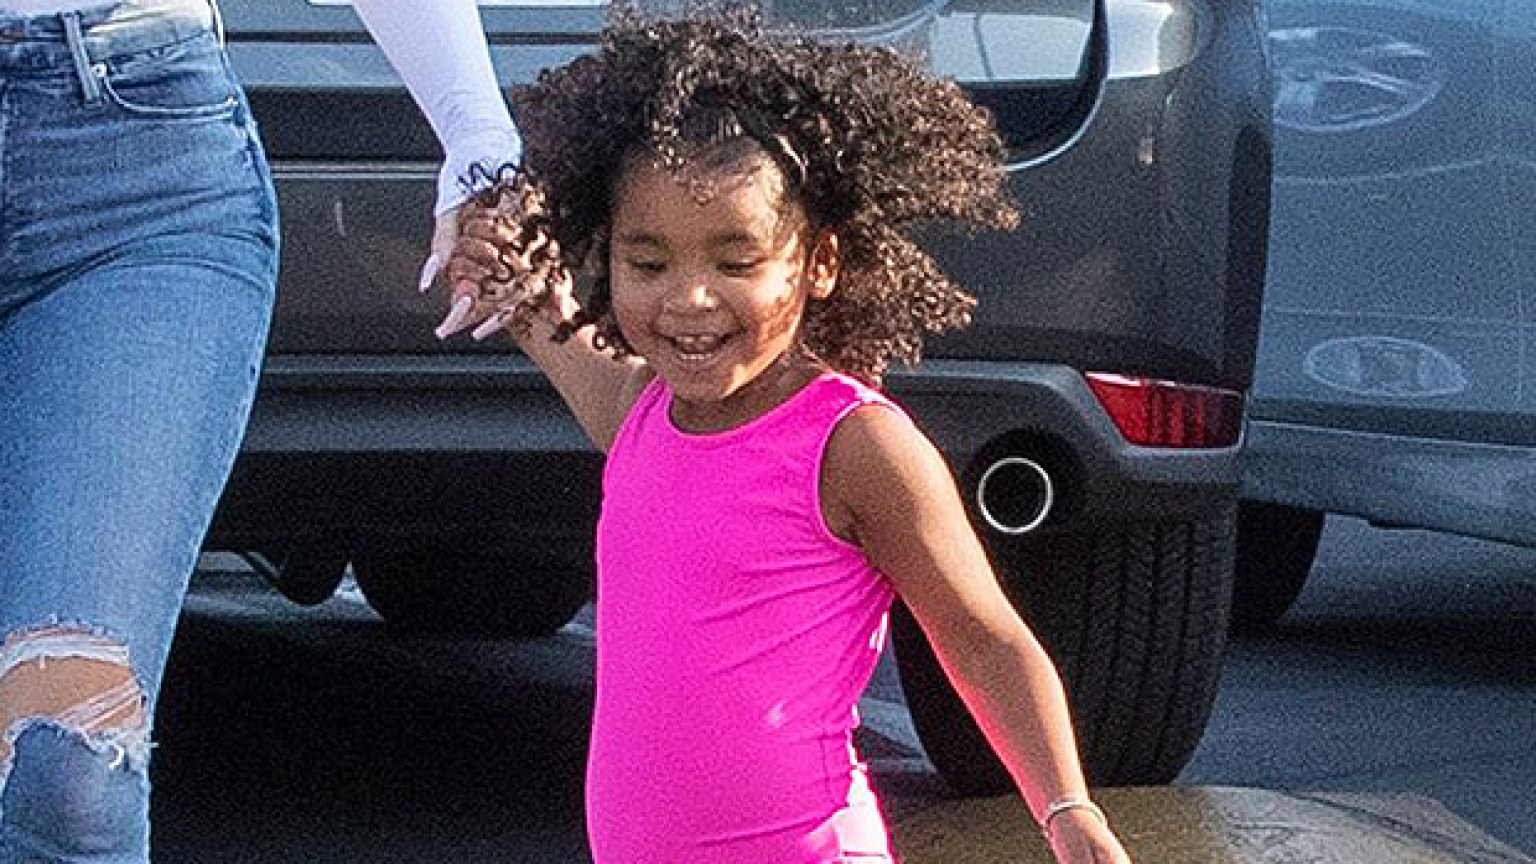 Khloe Kardashians Daughter True Is So Tall In Pink Tank Top And Skirt